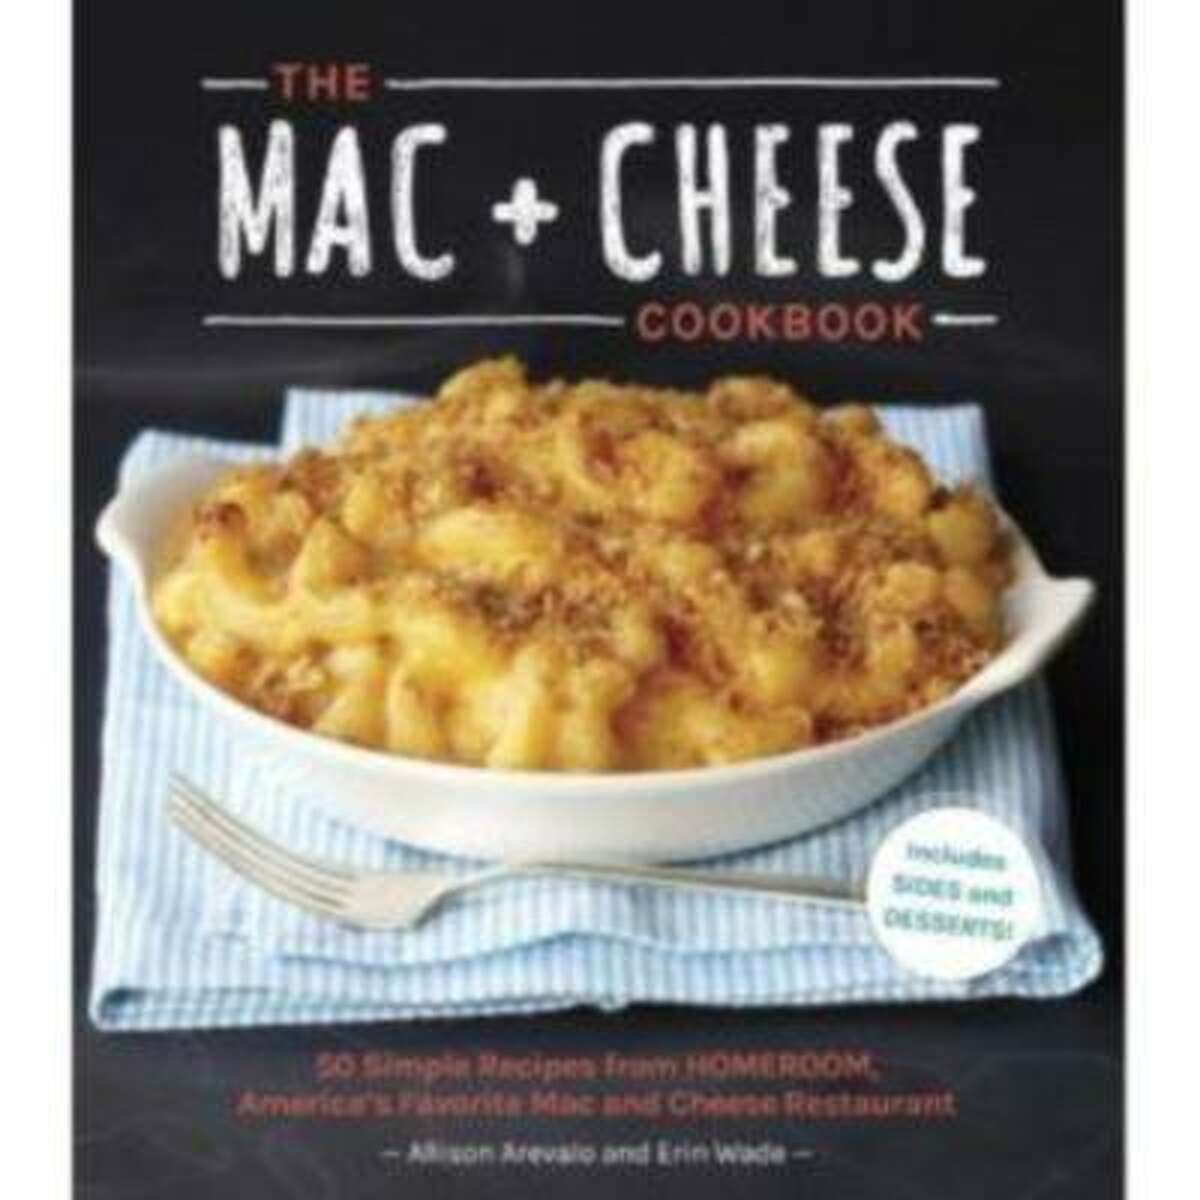 Allison Arevalo and Erin Wade's new "Mac+Cheese Cookbook" offers up 50 recipes from their popular Oakland restaurant, Homeroom. (Ten Speed Press)